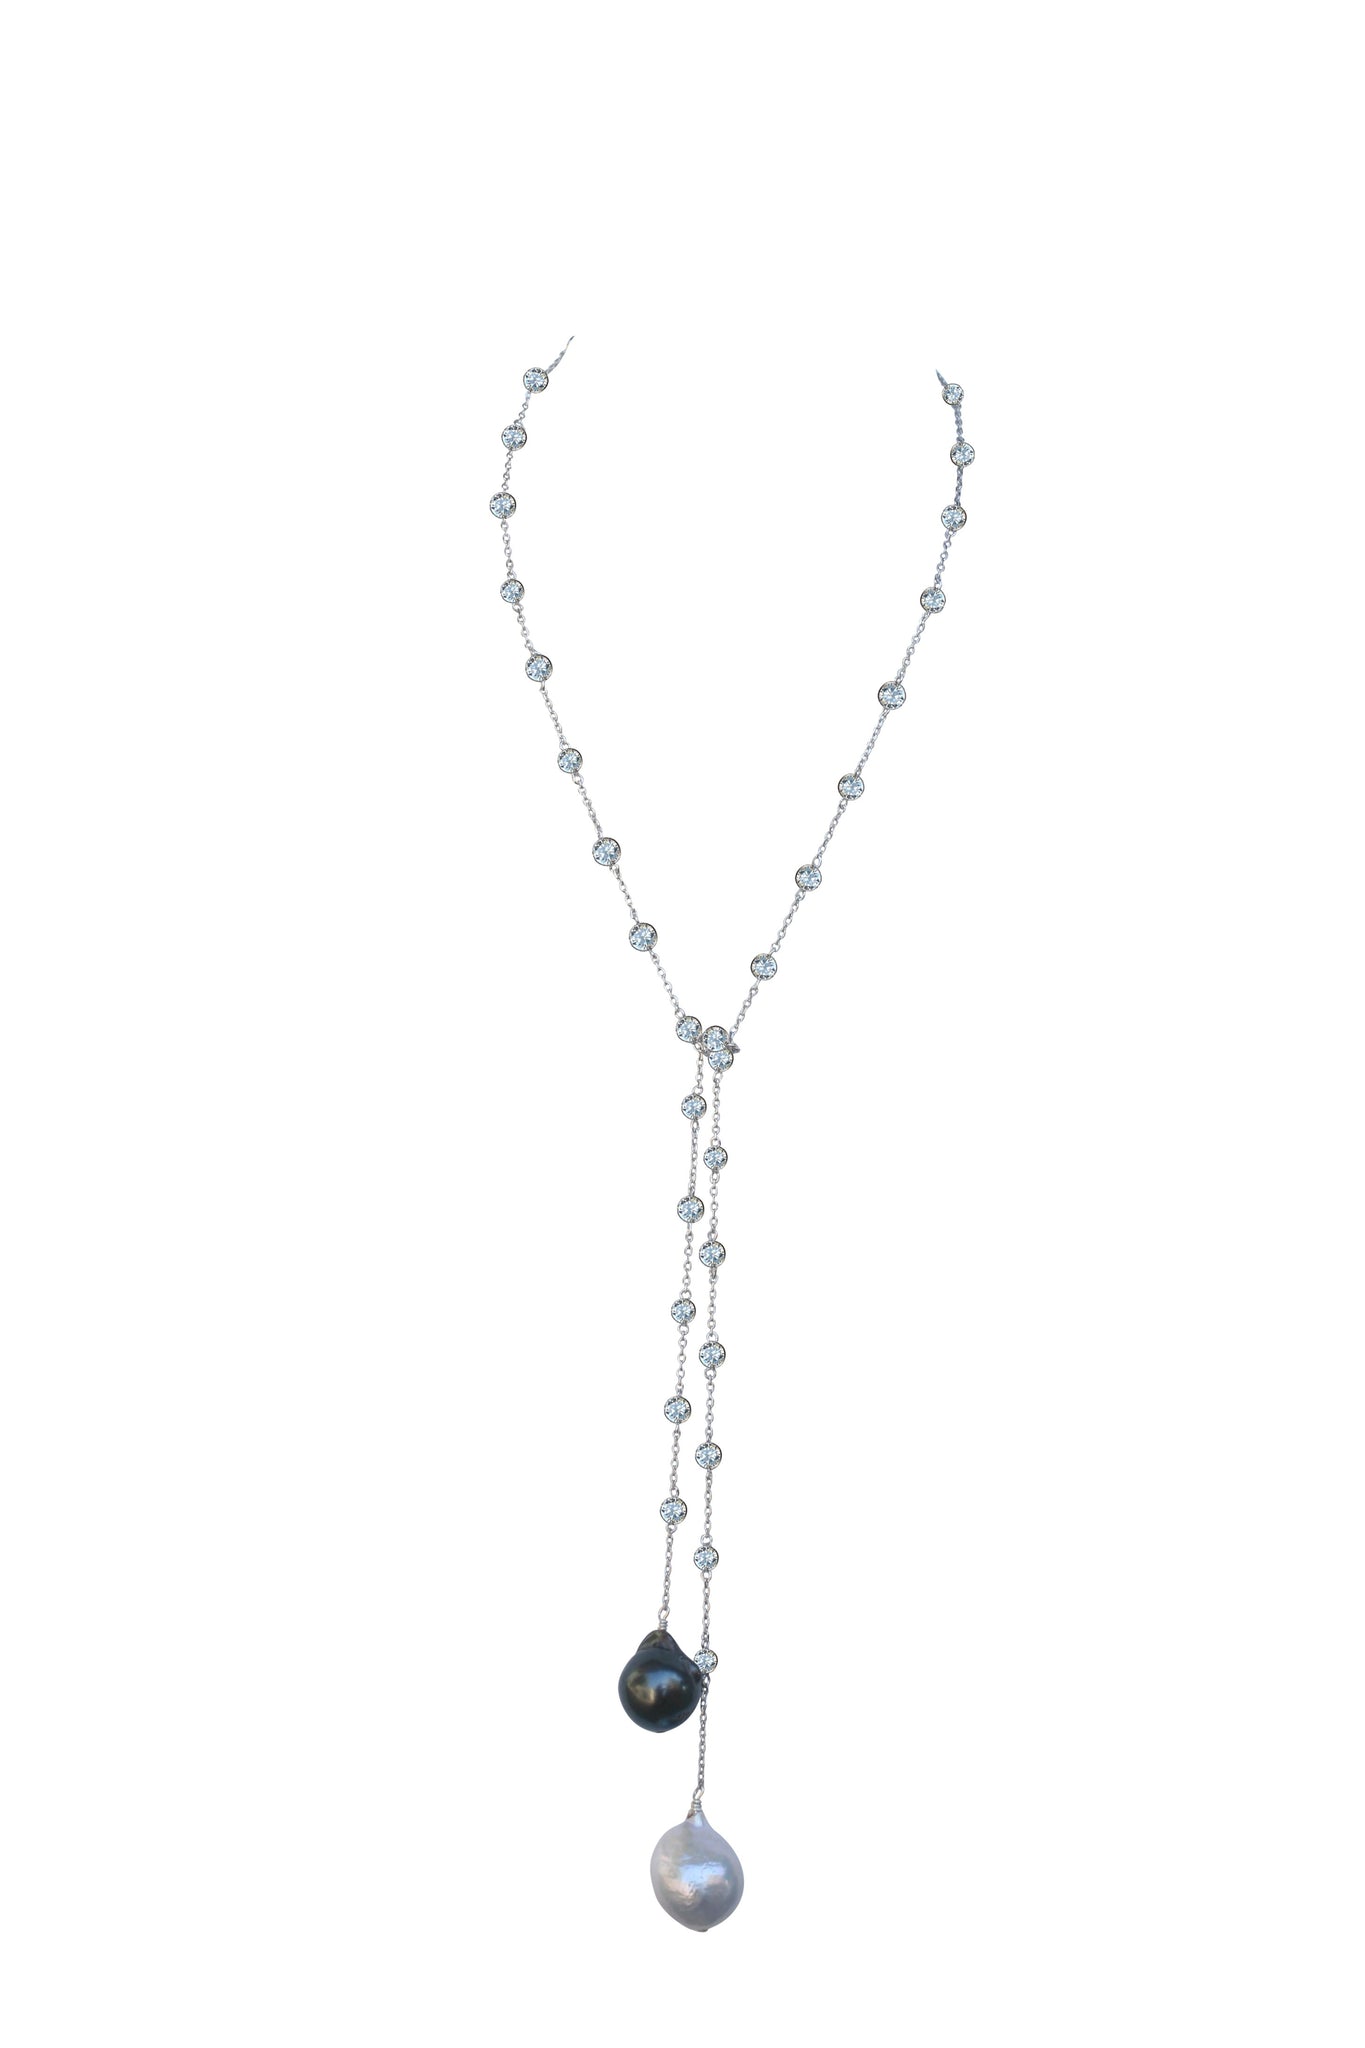 36'' Zirconite by the Yard finished with two extra large genuine Baroque Fresh Water Pearls Necklace lariat